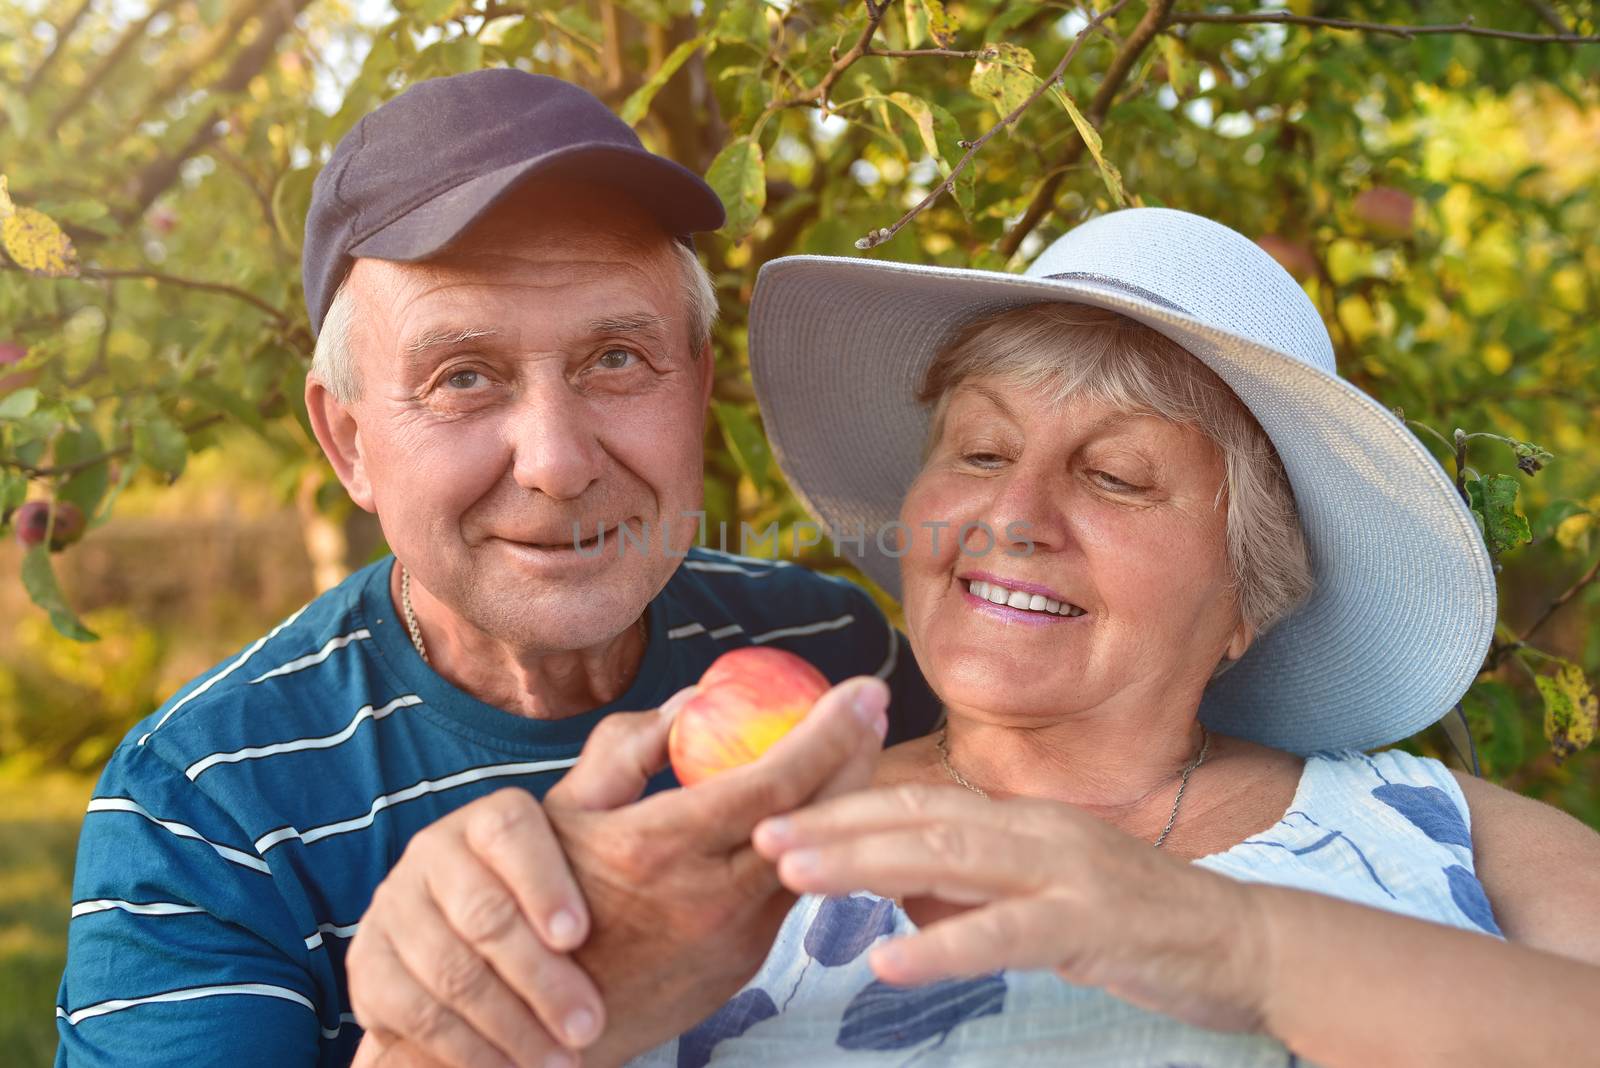 People smiling and picking apples. Happy old couple. From seeds to fruits.